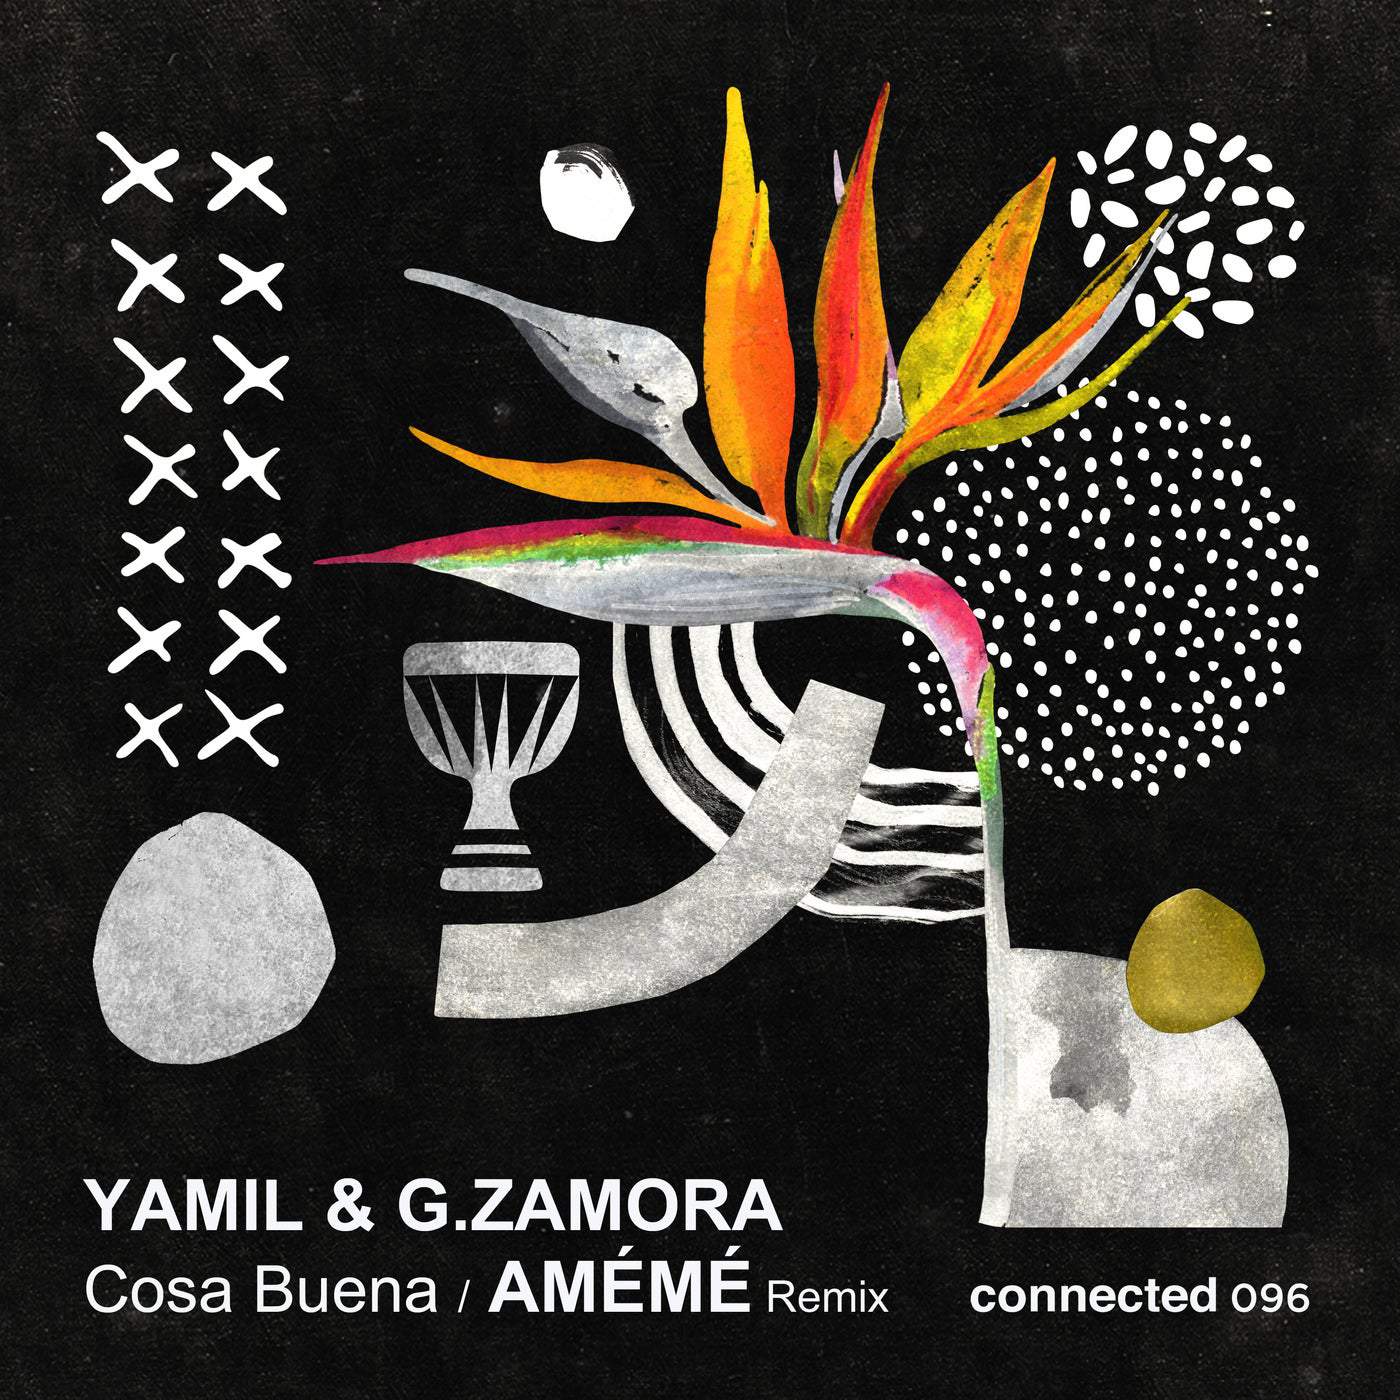 image cover: Yamil, G.Zamora - Cosa Buena (AMEME Remix) [CONNECTED096] / Connected Frontline